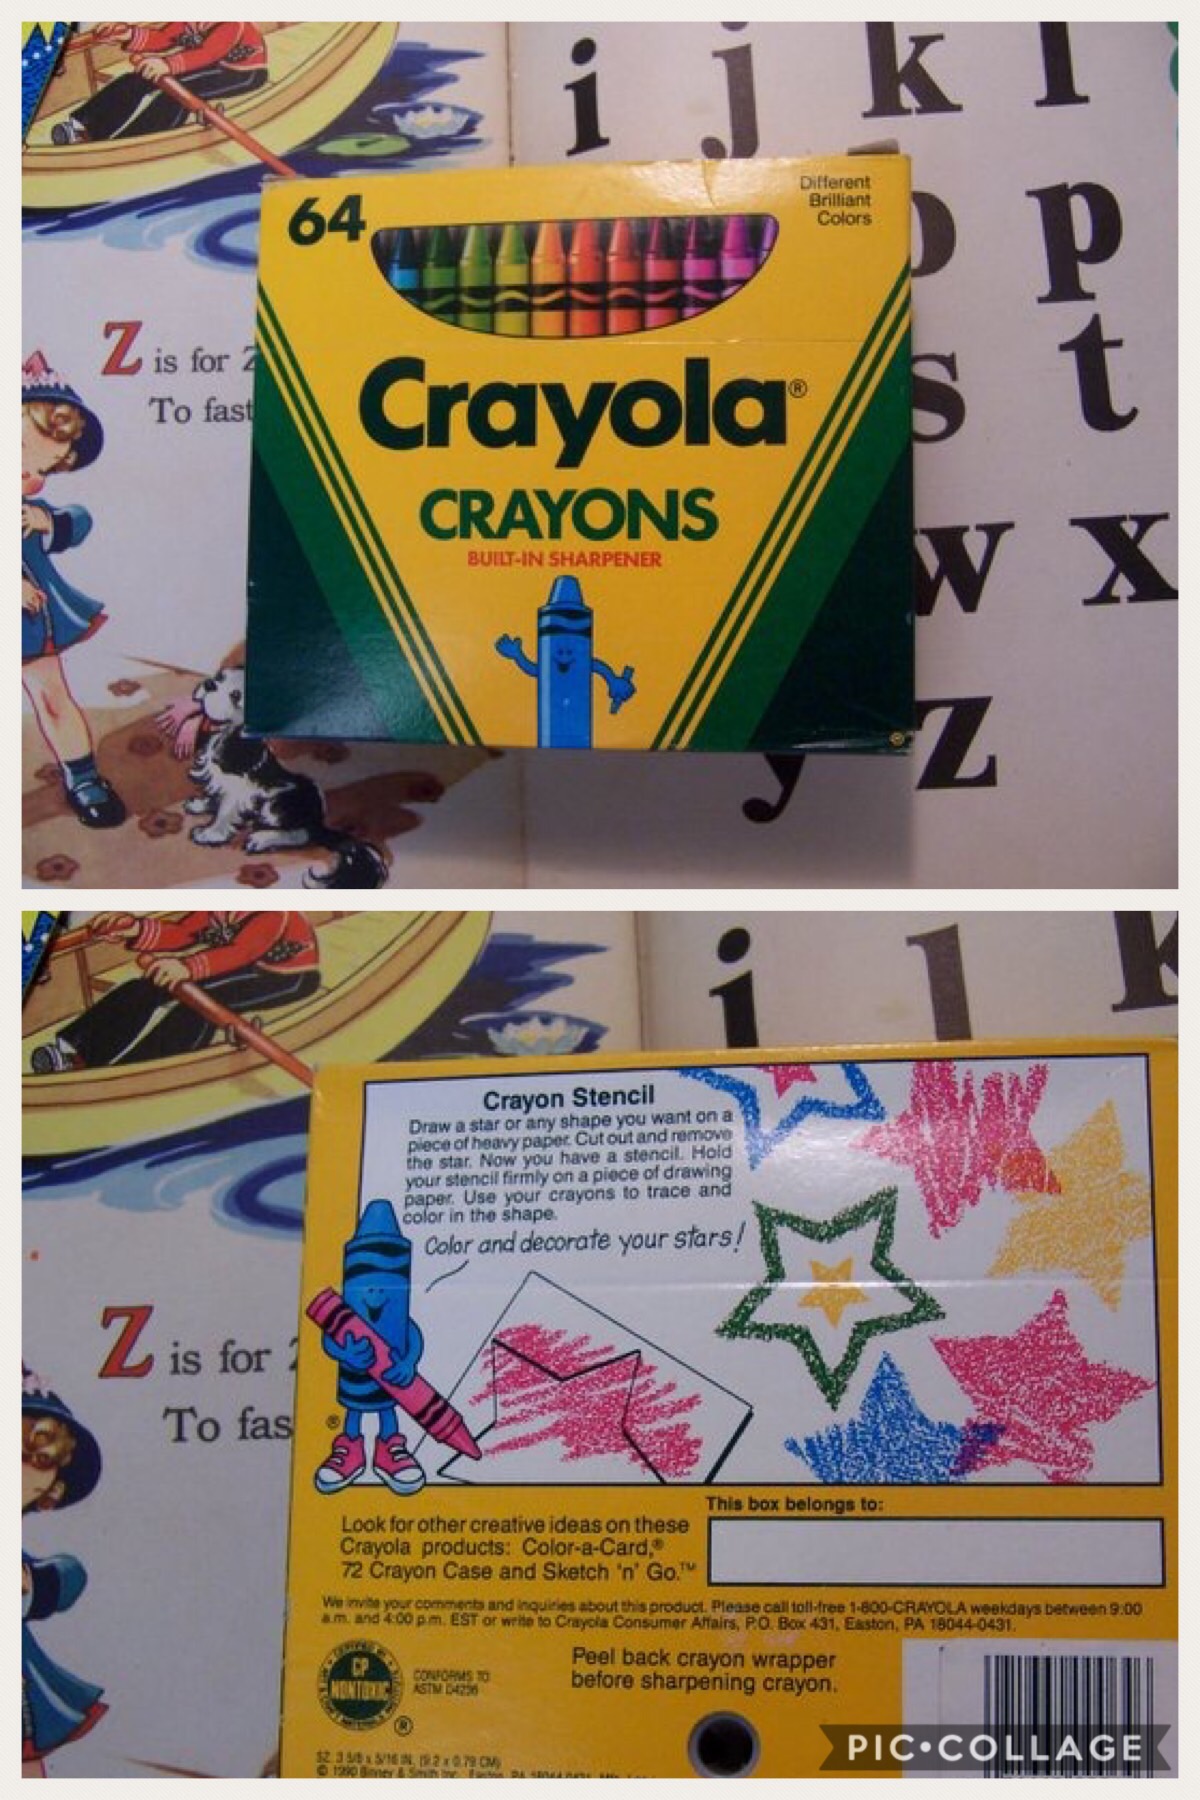 Throwback to a 1990's box of Crayola crayons with the sharpener on the back